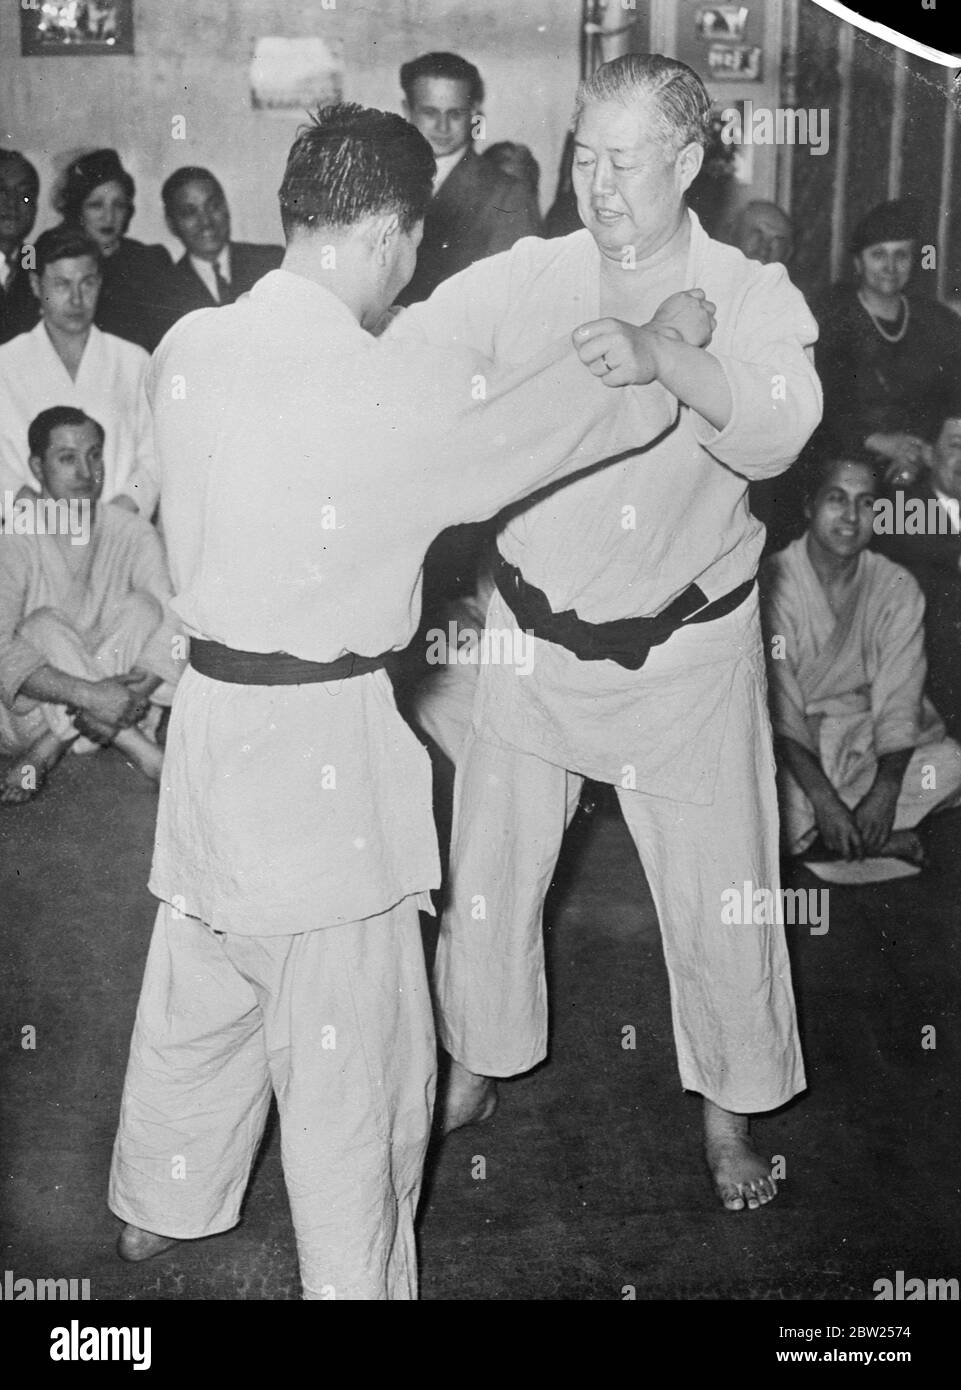 When the An Ambassador gets rough!. Wrestler from the diplomatic corps. Mr Sugimura, Japanese Ambassador to Paris, demonstrated his prowess as a Jujitsu wrestler, when he twice through Professor Kawaishi, founder of the Franco Japanese jujitsu club, at a meeting of the club in Paris. Mr Sugimura is now over 50 years of age. He is a former university champion at jujitsu and is holder of the black belt, denoting a high rank as a wrestler. Photo shows, Mr Sugimura (facing camera) getting to grips with his opponent. 31 January 1938 Stock Photo